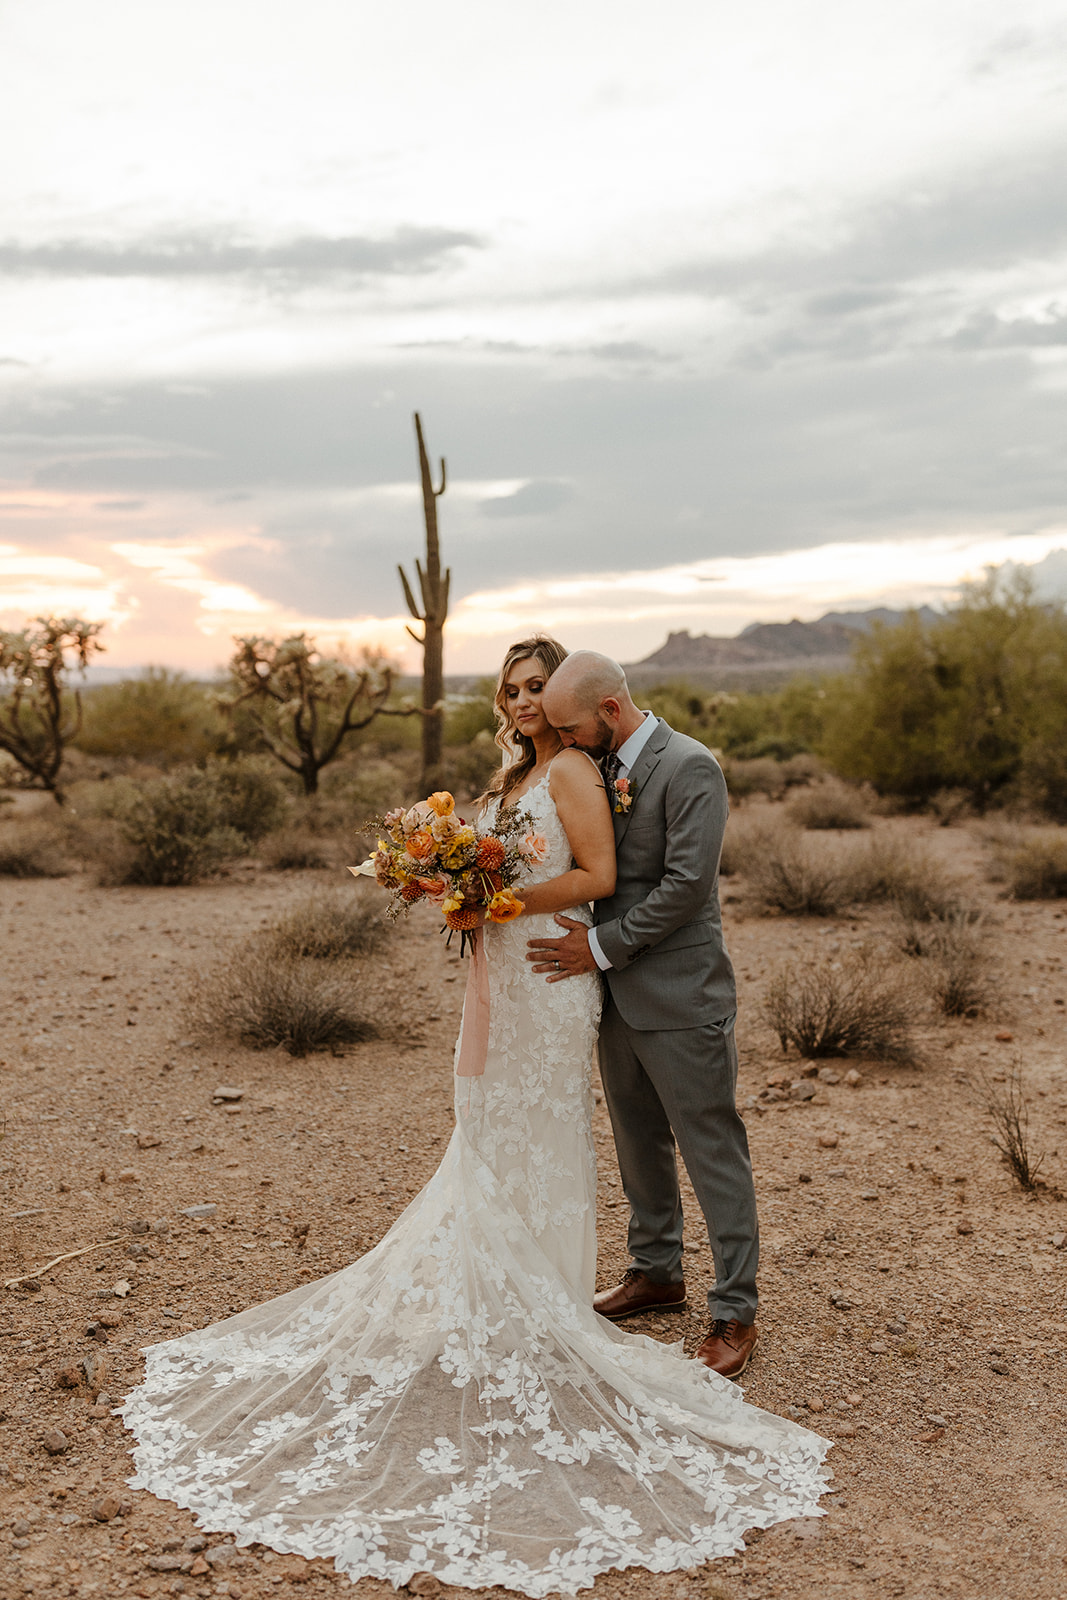 Beautiful bride and groom pose in front of a full grown cactus in lost dutchman state park